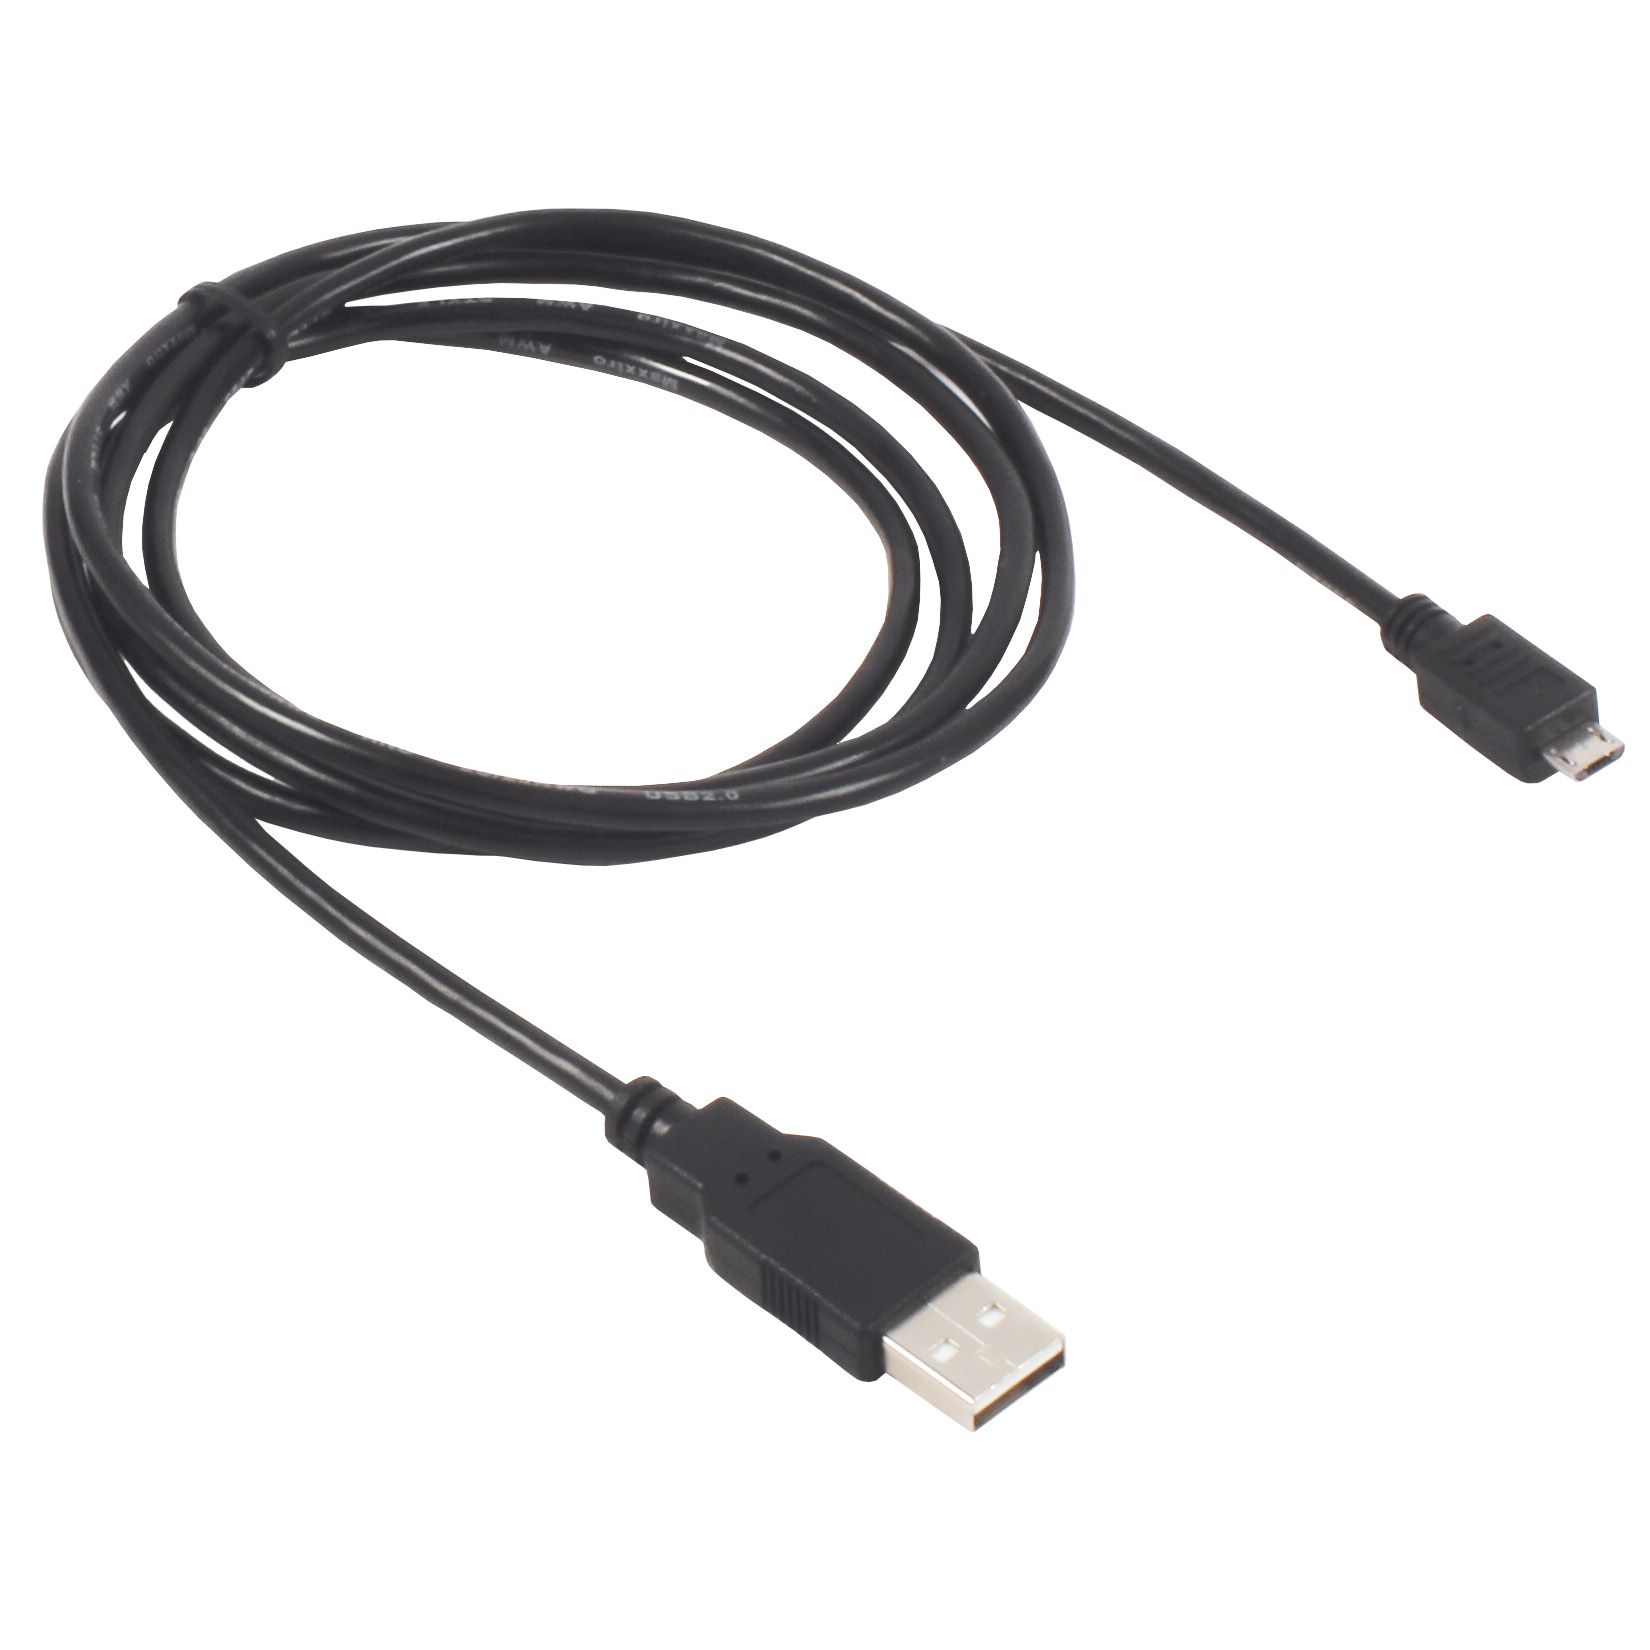 Speed controller 5A accessories - USB cable for PC link -  - 